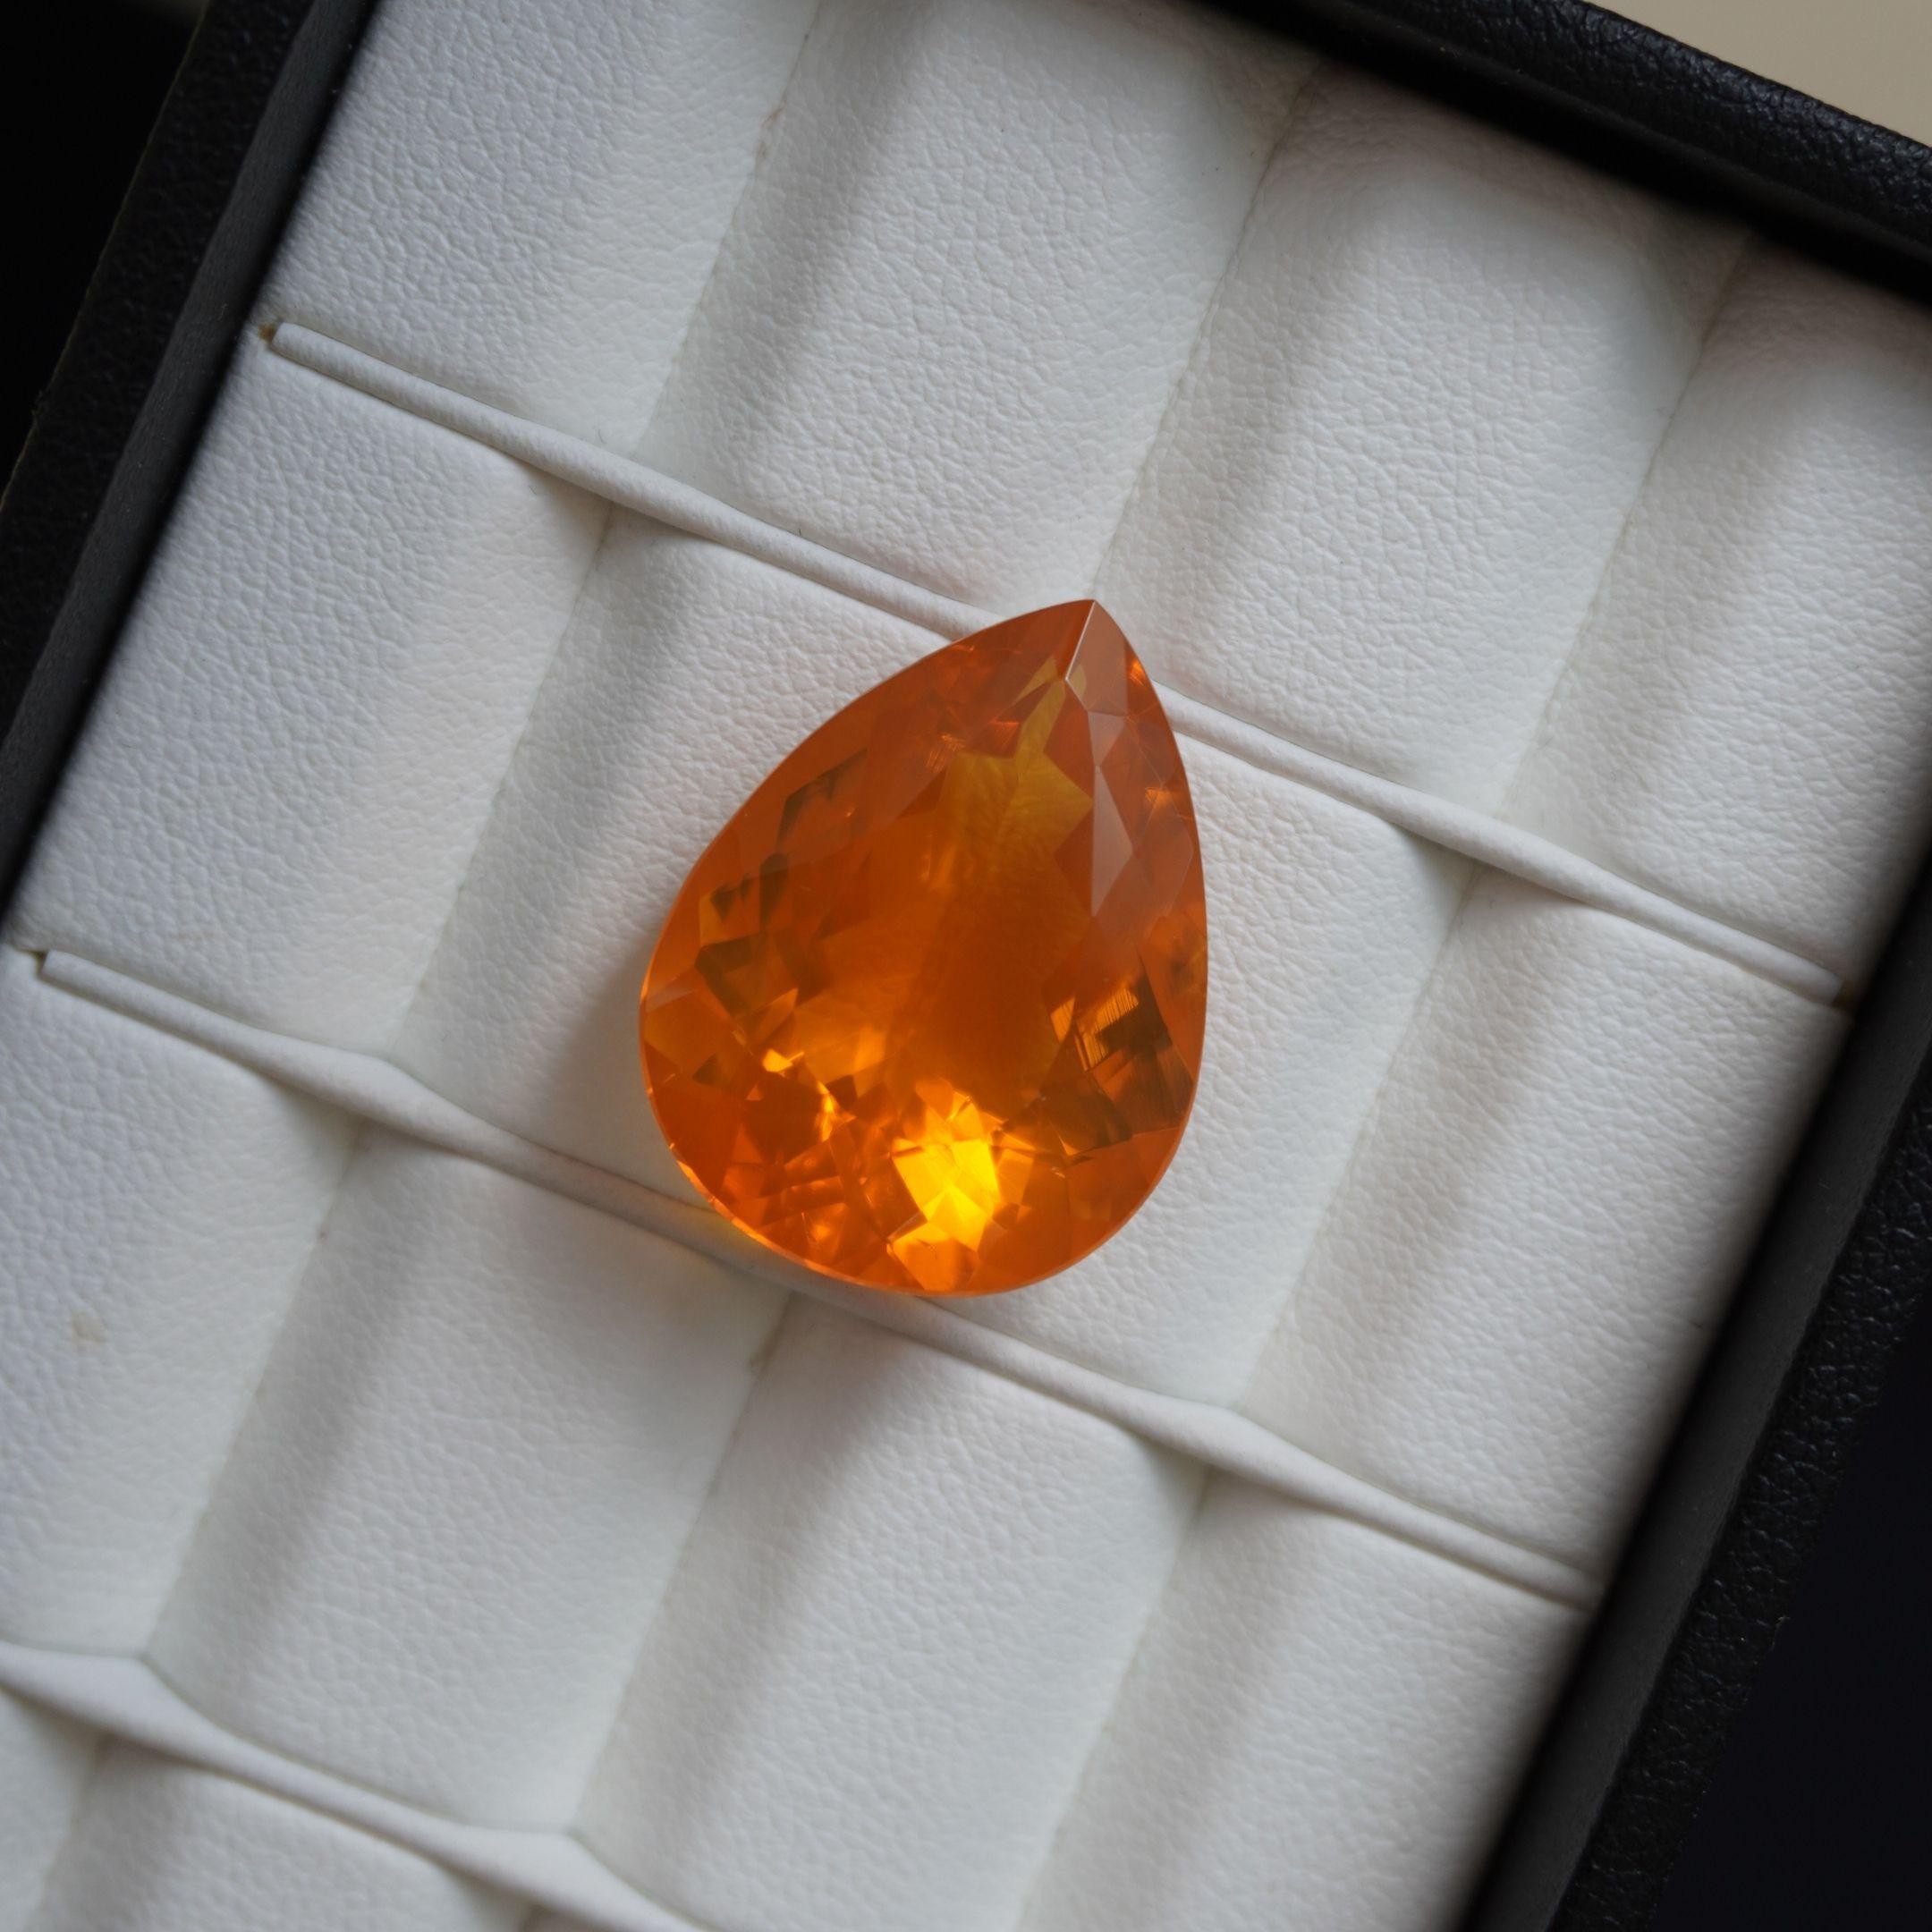 DETAILS
Fire Opal Weight: 18.19 CT
Measurements: 23.4 x 18.1 mm
Shape: Pear
Color: Intense Orange
Hardness: 5.5 - 6.5
Birthstone Month: October
Natural

SHIPPING
All items will be shipped in a safe and protective packaging within 1 day including